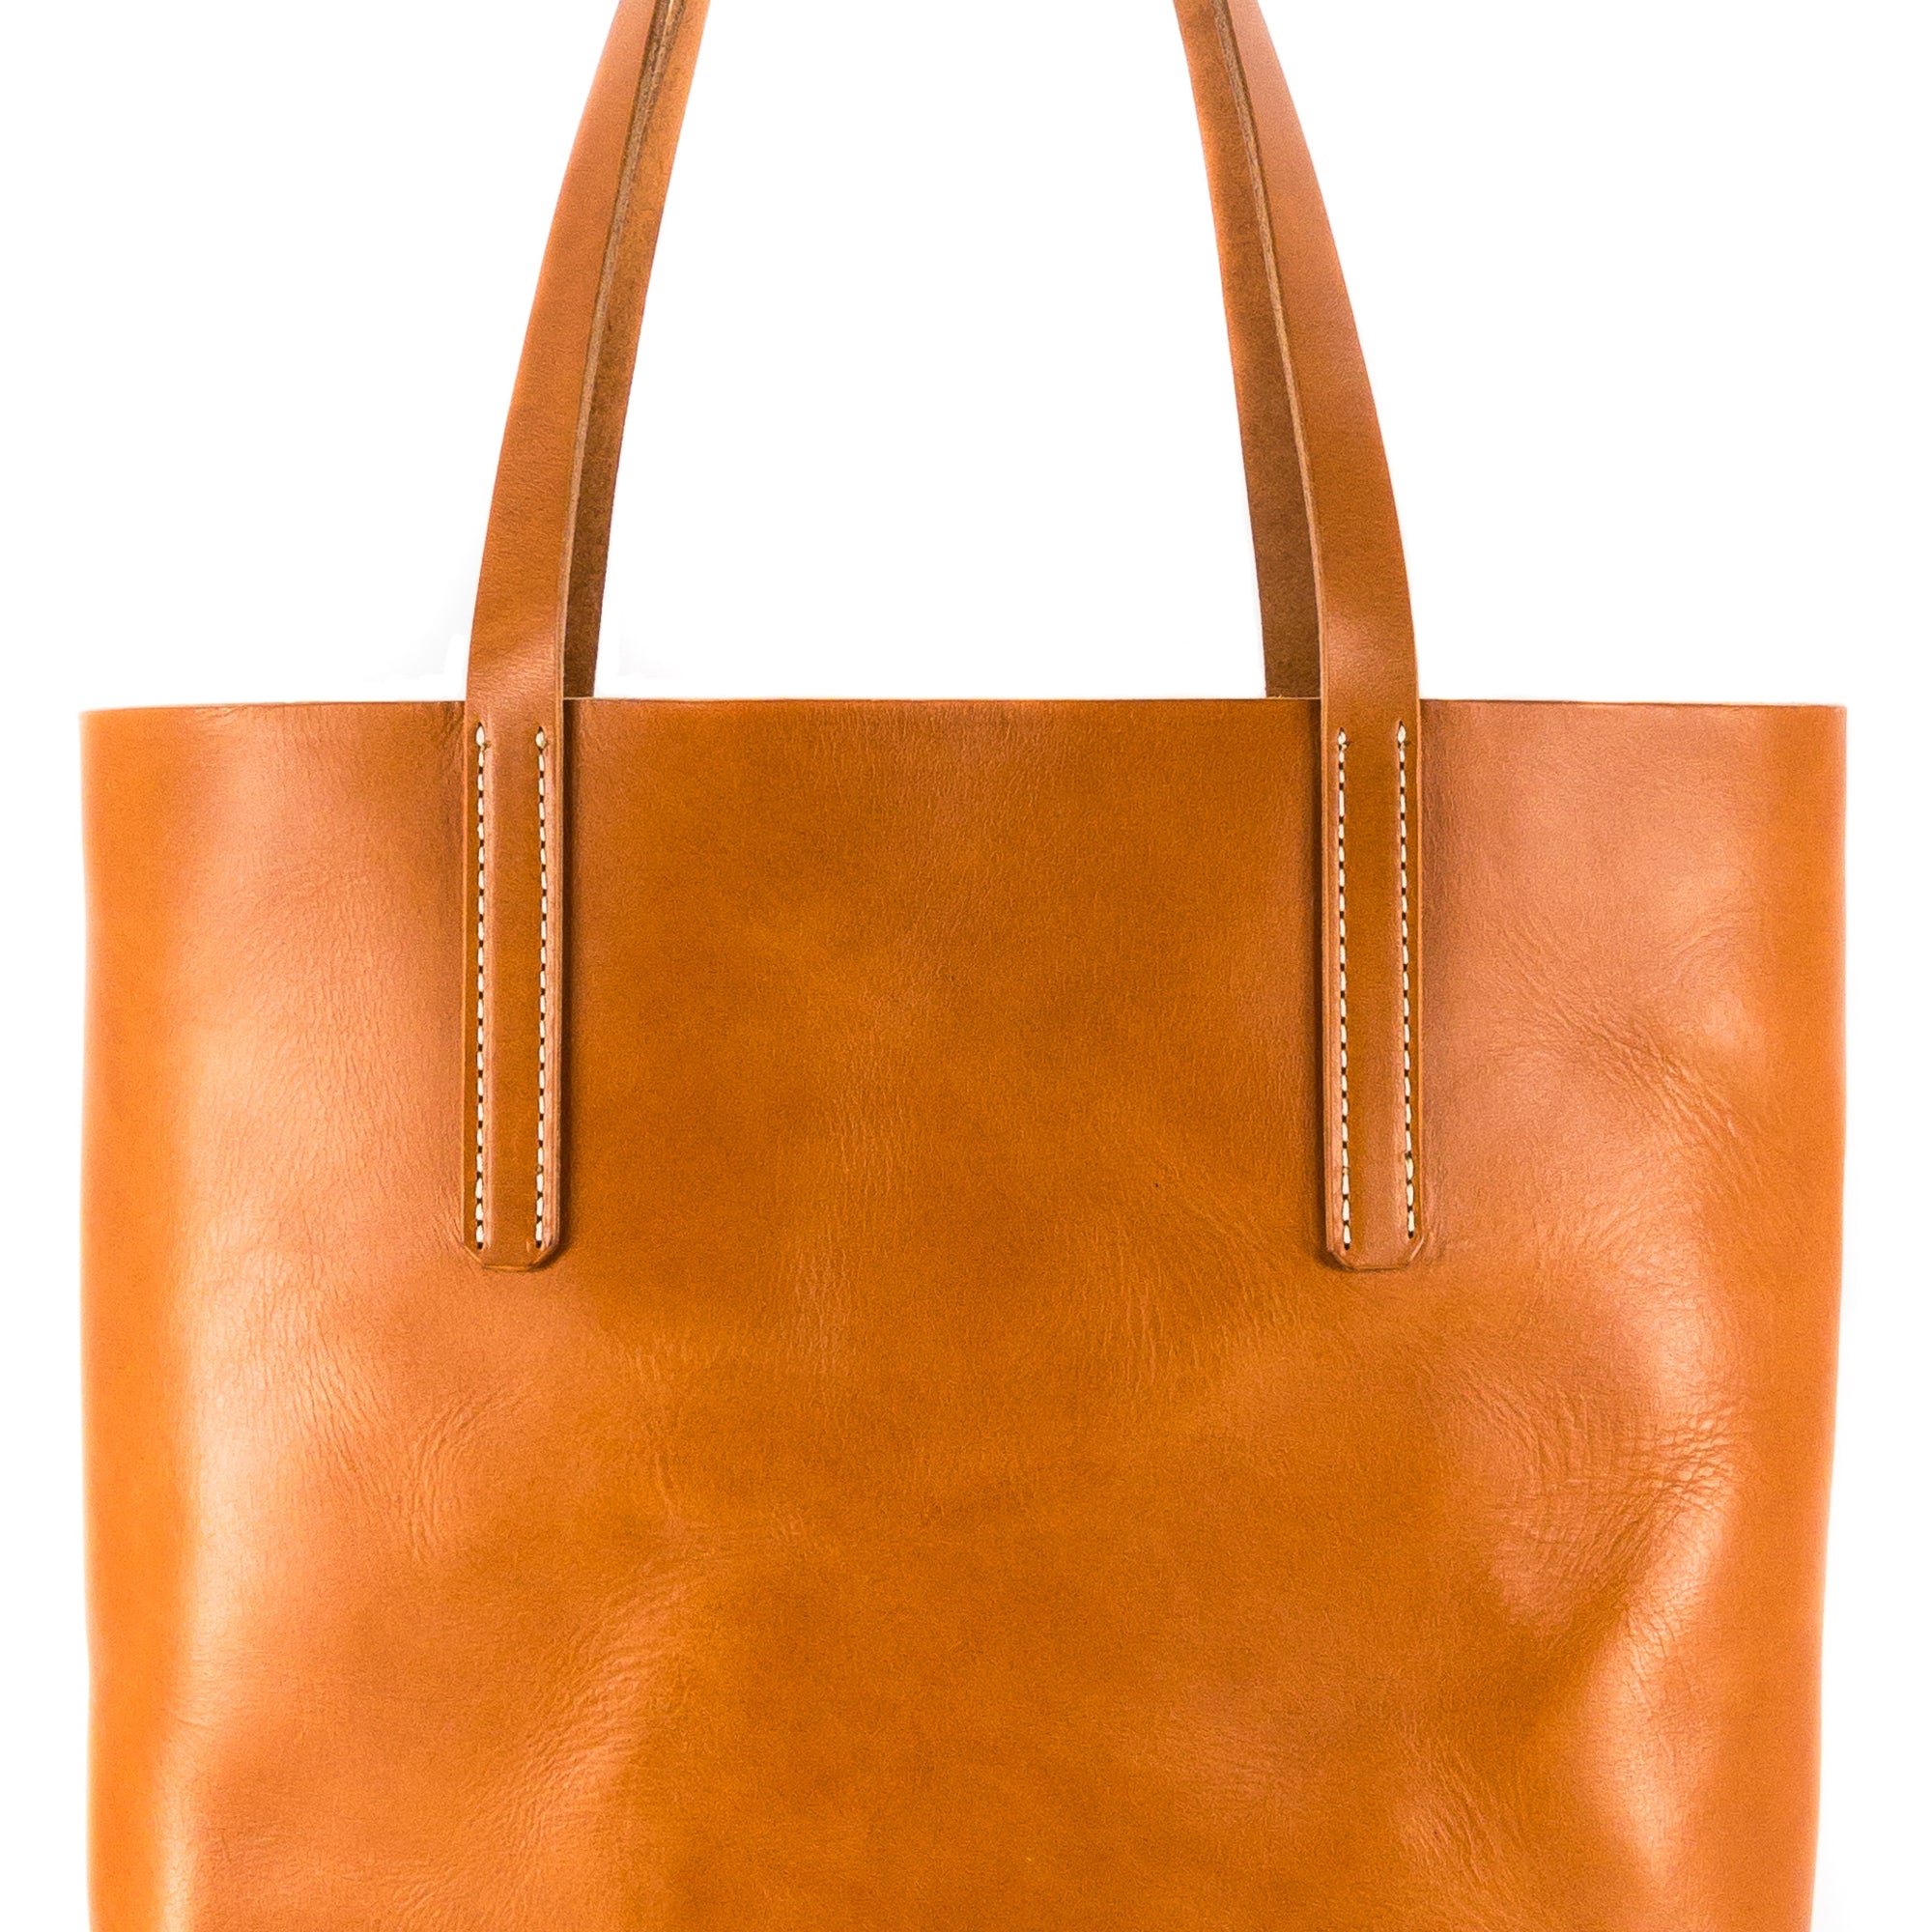 English Bridle Leather Tote Bag in English Tan - Everyday Heirloom Bag ...